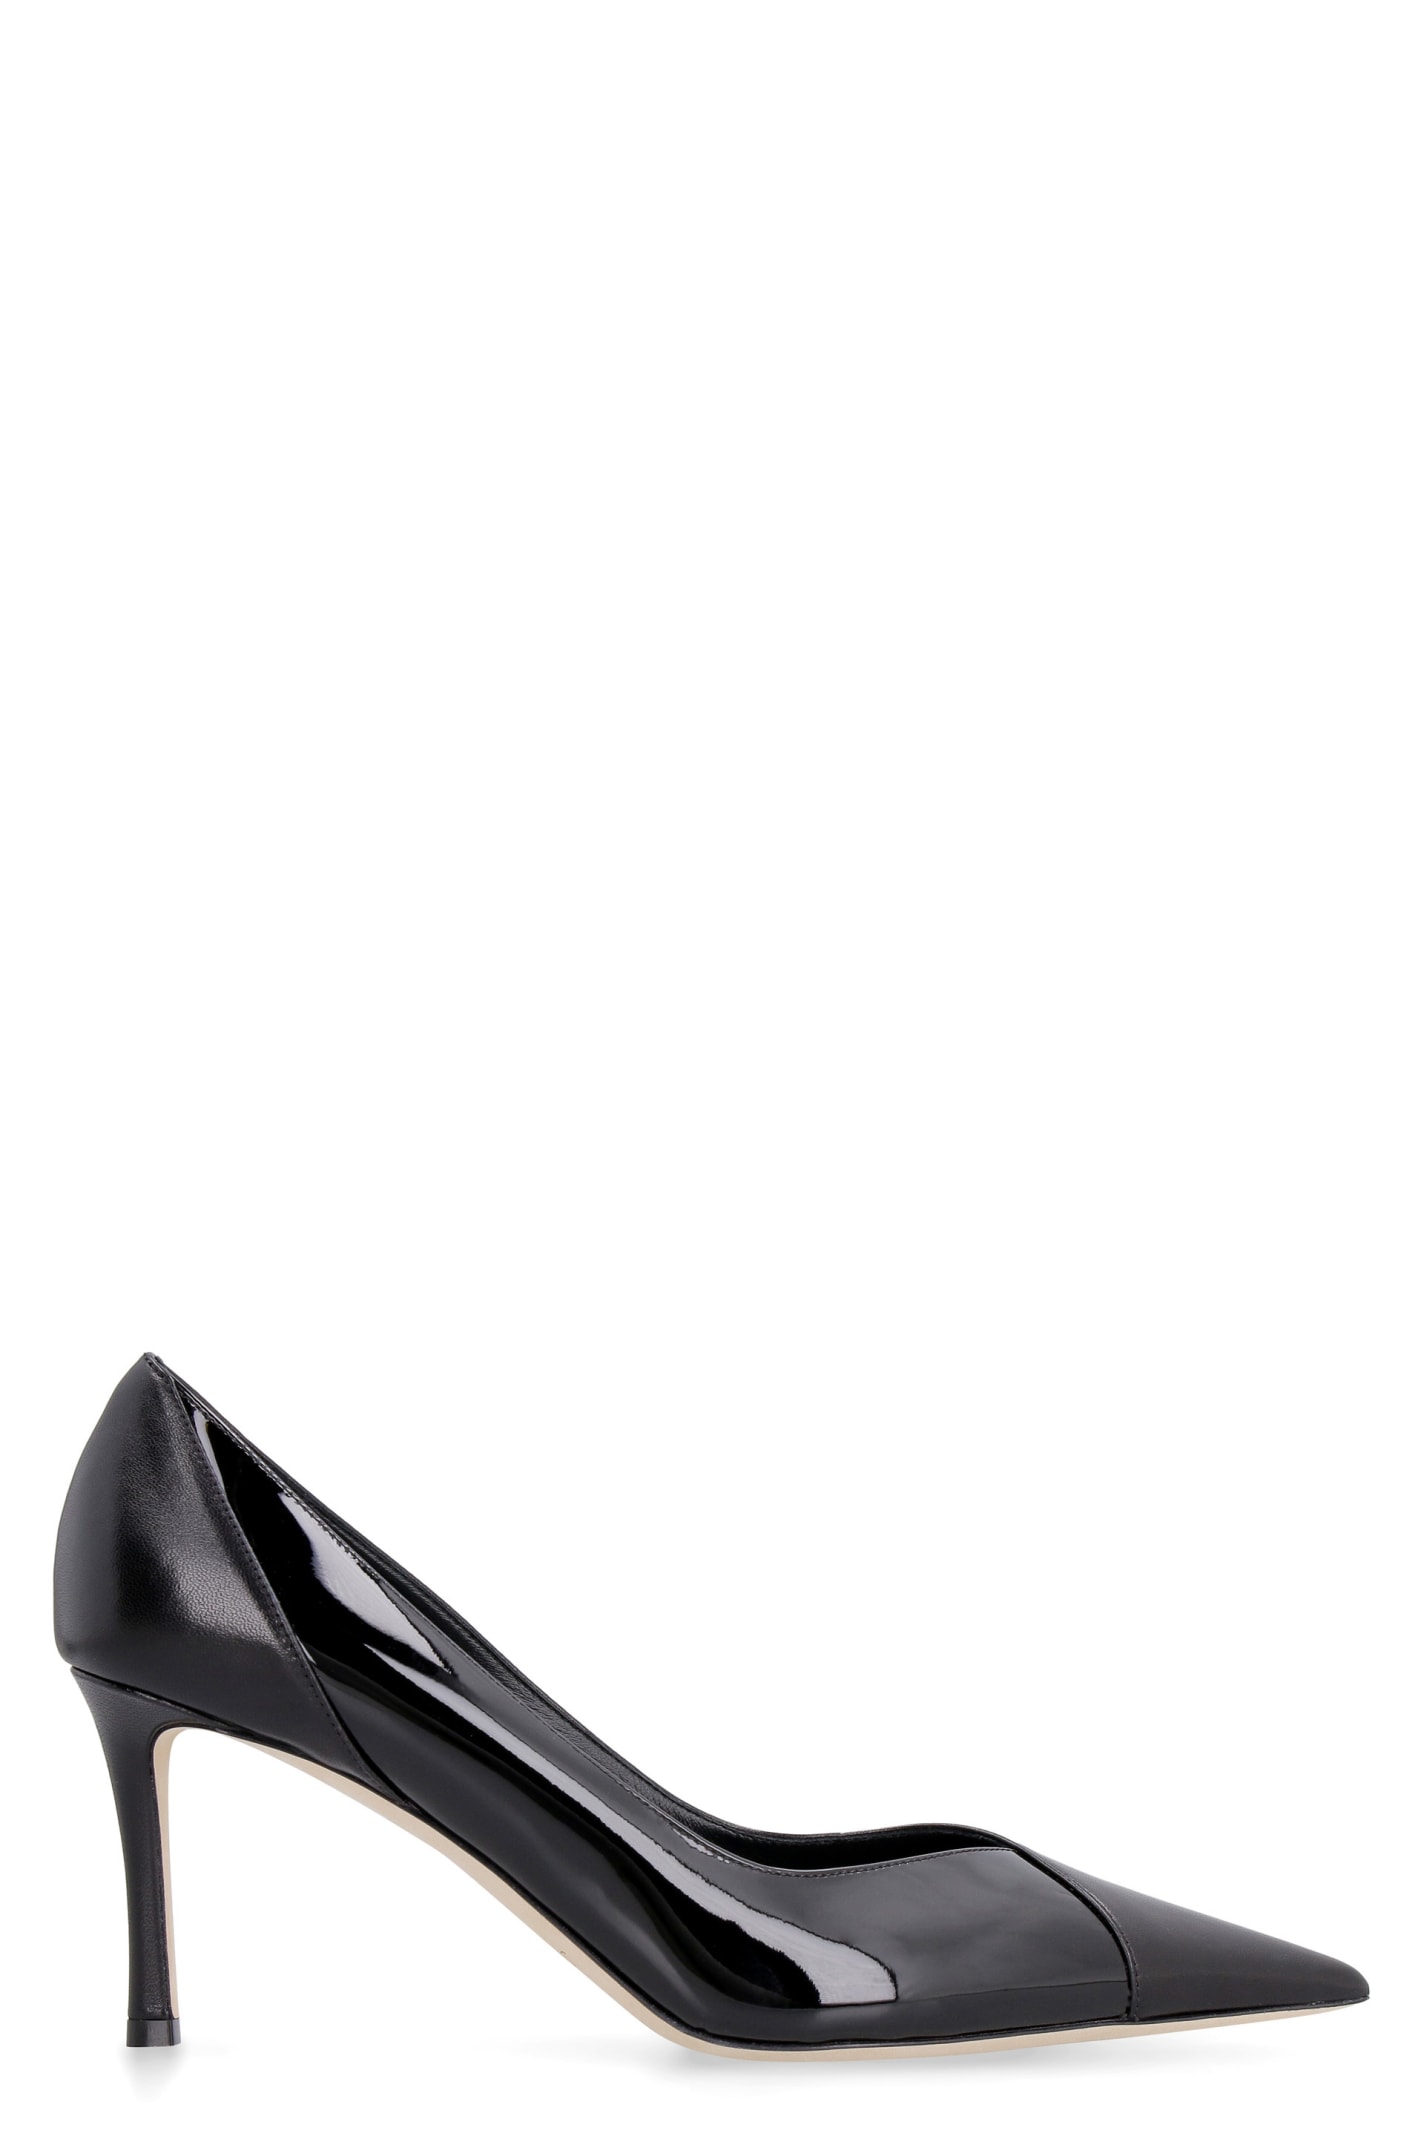 JIMMY CHOO CASS 75 PATENT LEATHER POINTY-TOE PUMPS